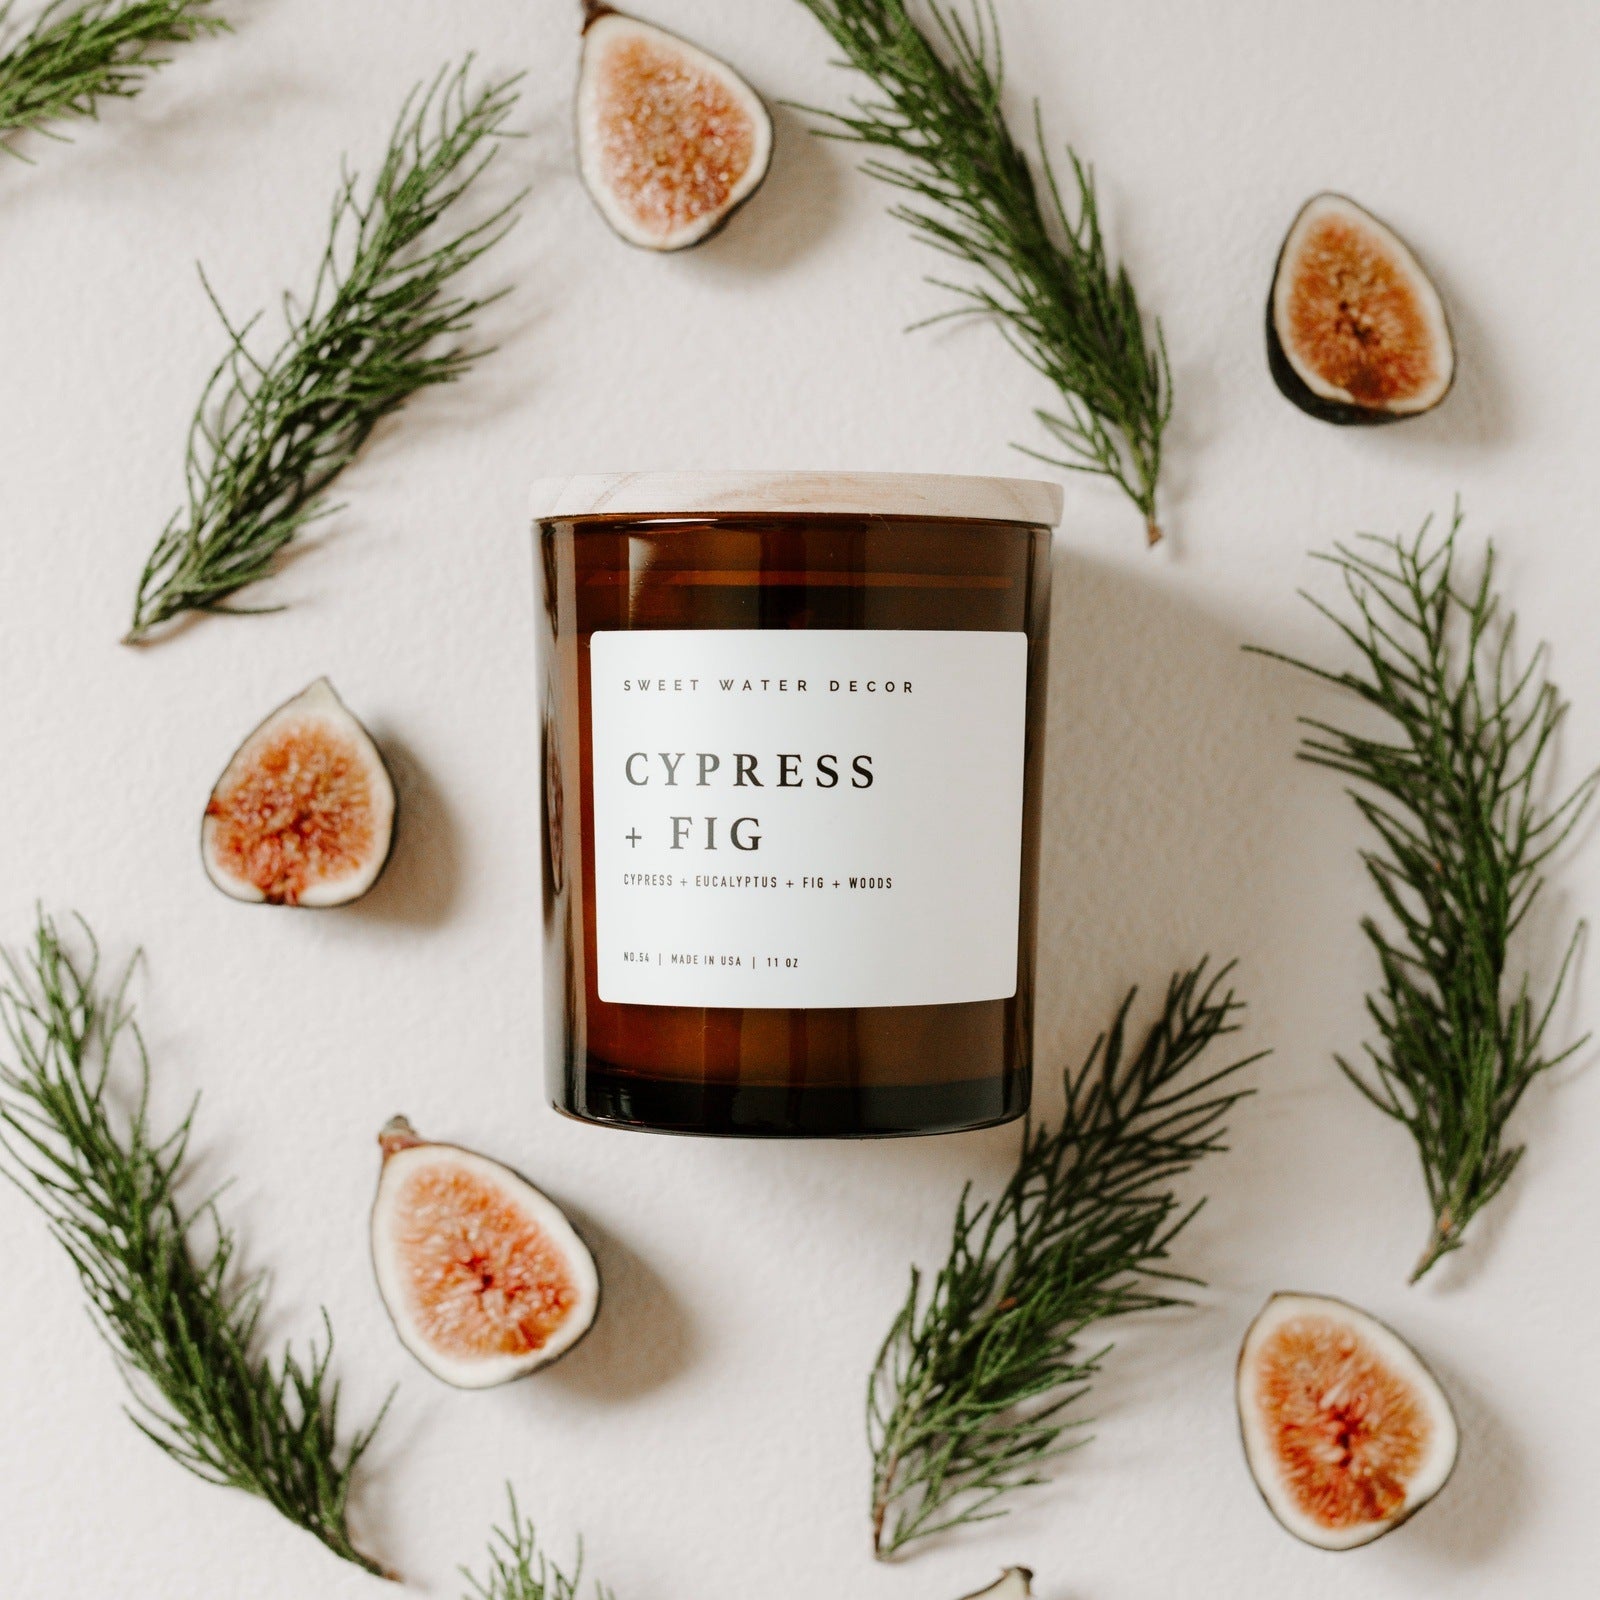 Cypress and Fig Amber Jar Candle 11 oz